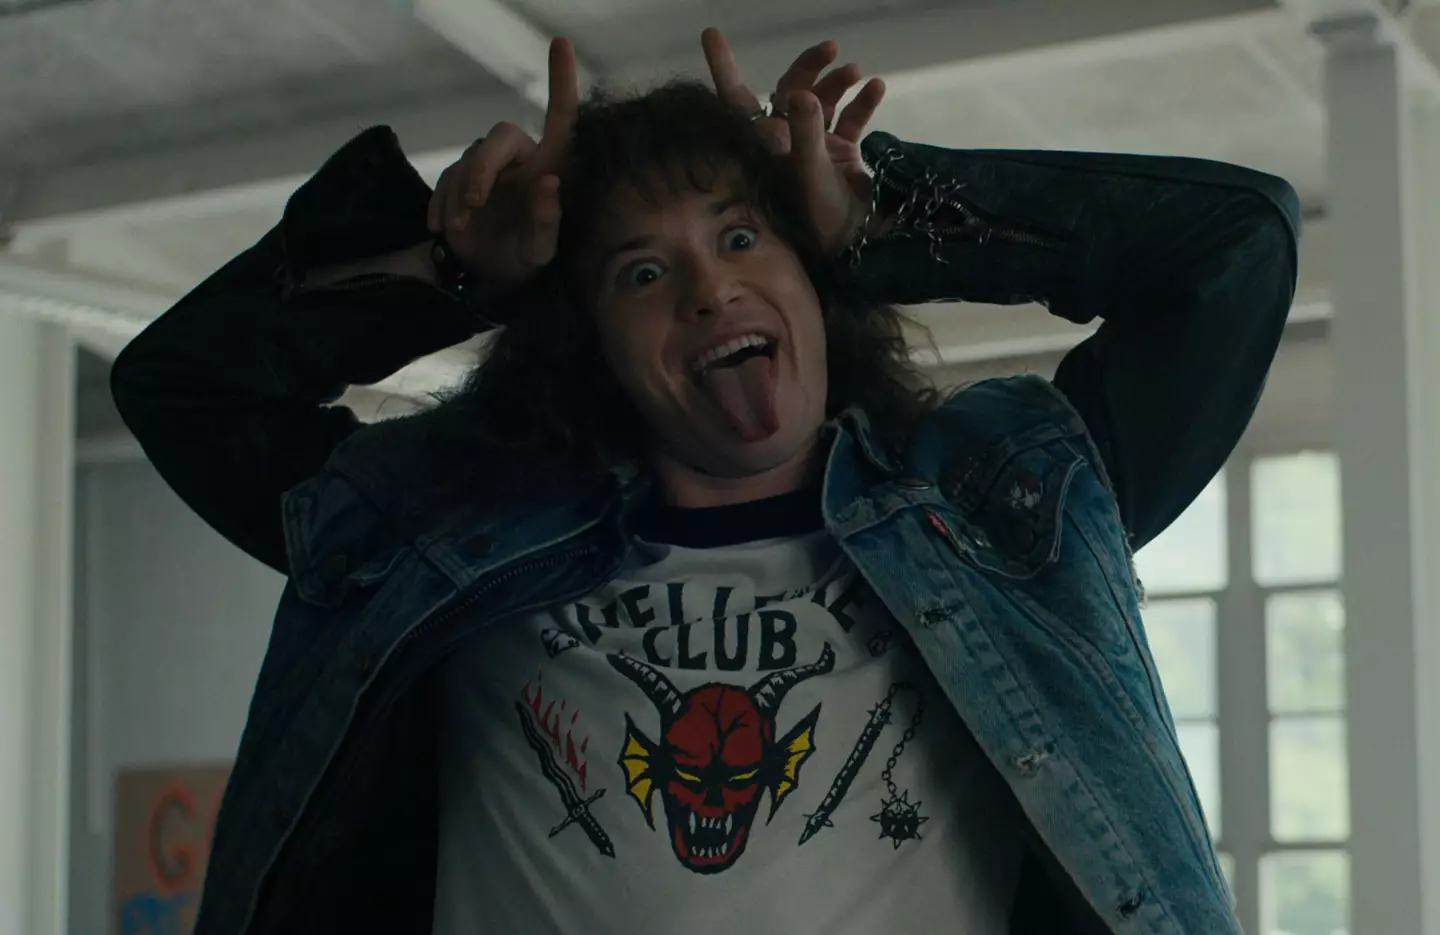 Eddie can be seen playing the guitar in the trailer.